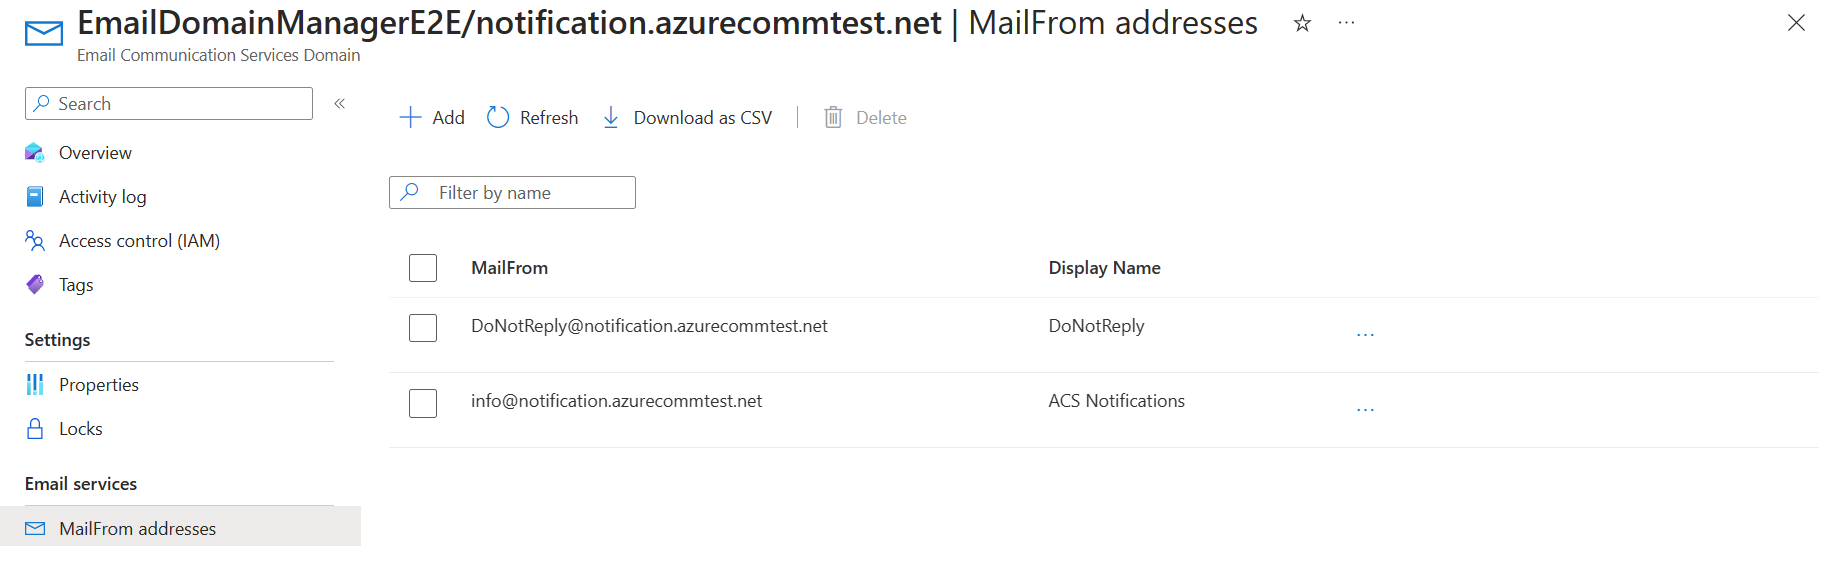 Screenshot that shows Mailfrom addresses list with updated values.